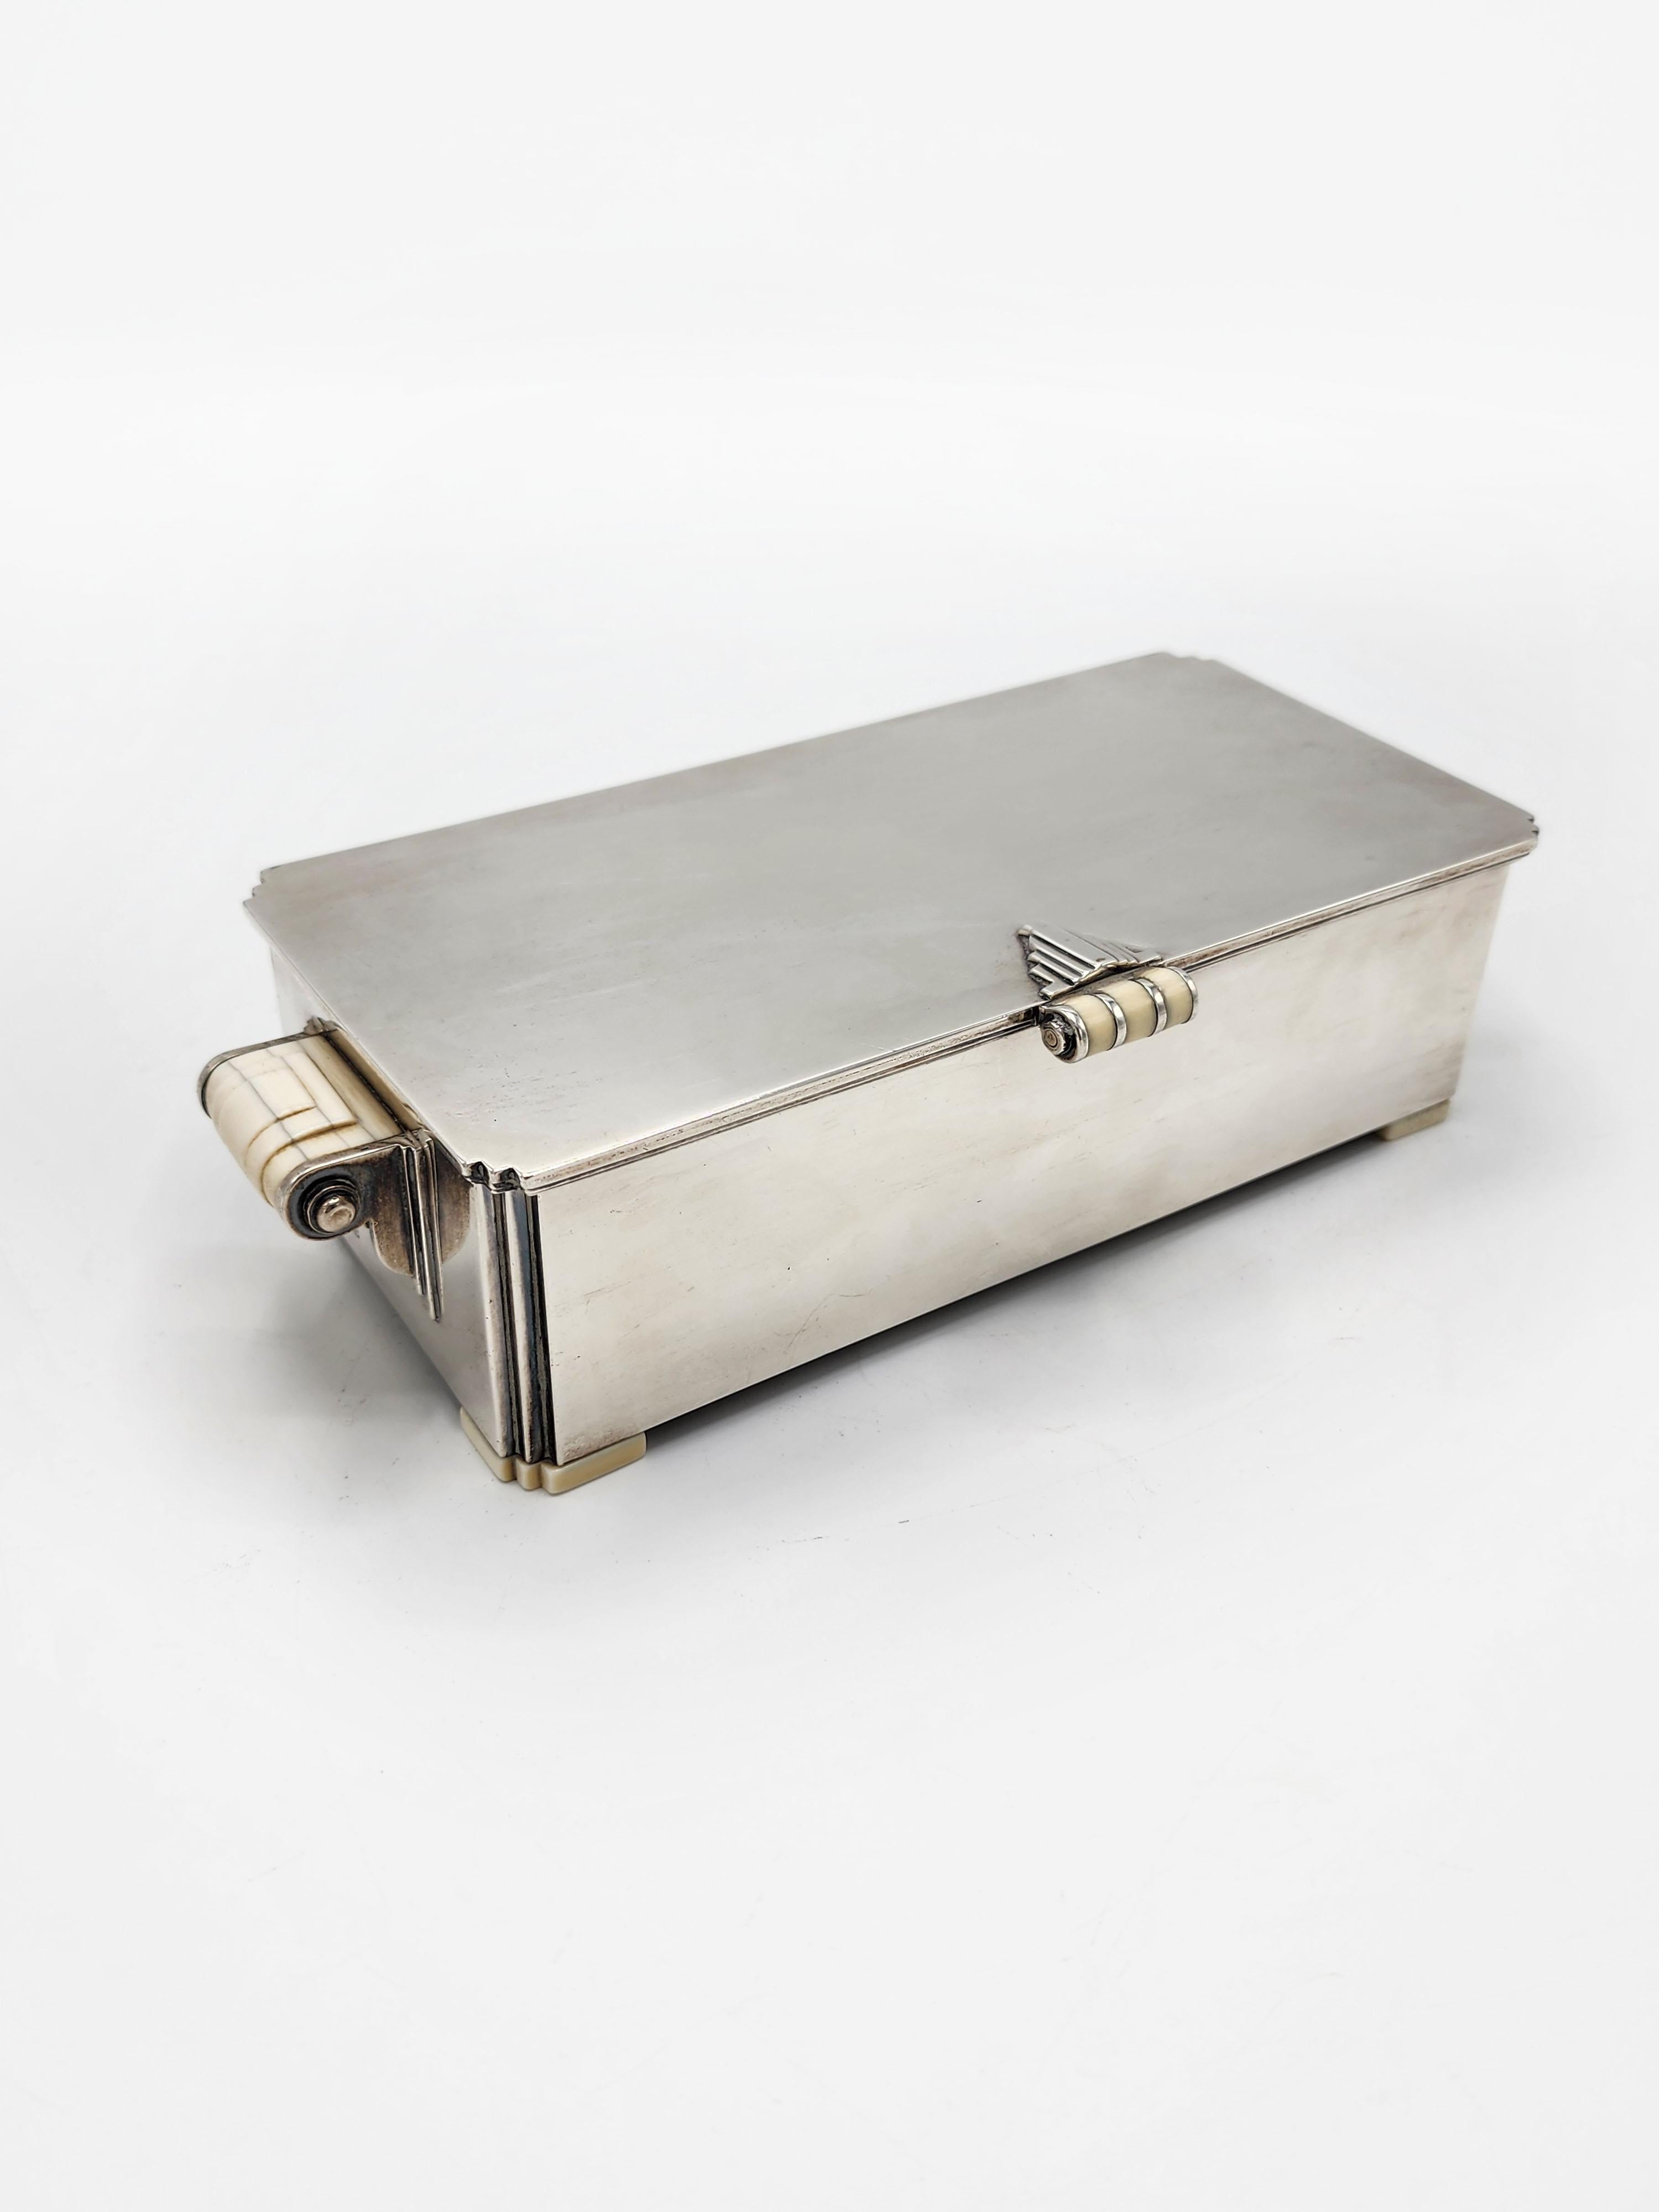 Antique Art Deco Sterling Silver Tobacco Box
A very elegant Art Deco sterling silver cigar/cigarette case, having an ivory handle, handles and legs with a geometric carving, smooth rectangular body the edges with zig zag cuts.
Measures:
Height: 5.5